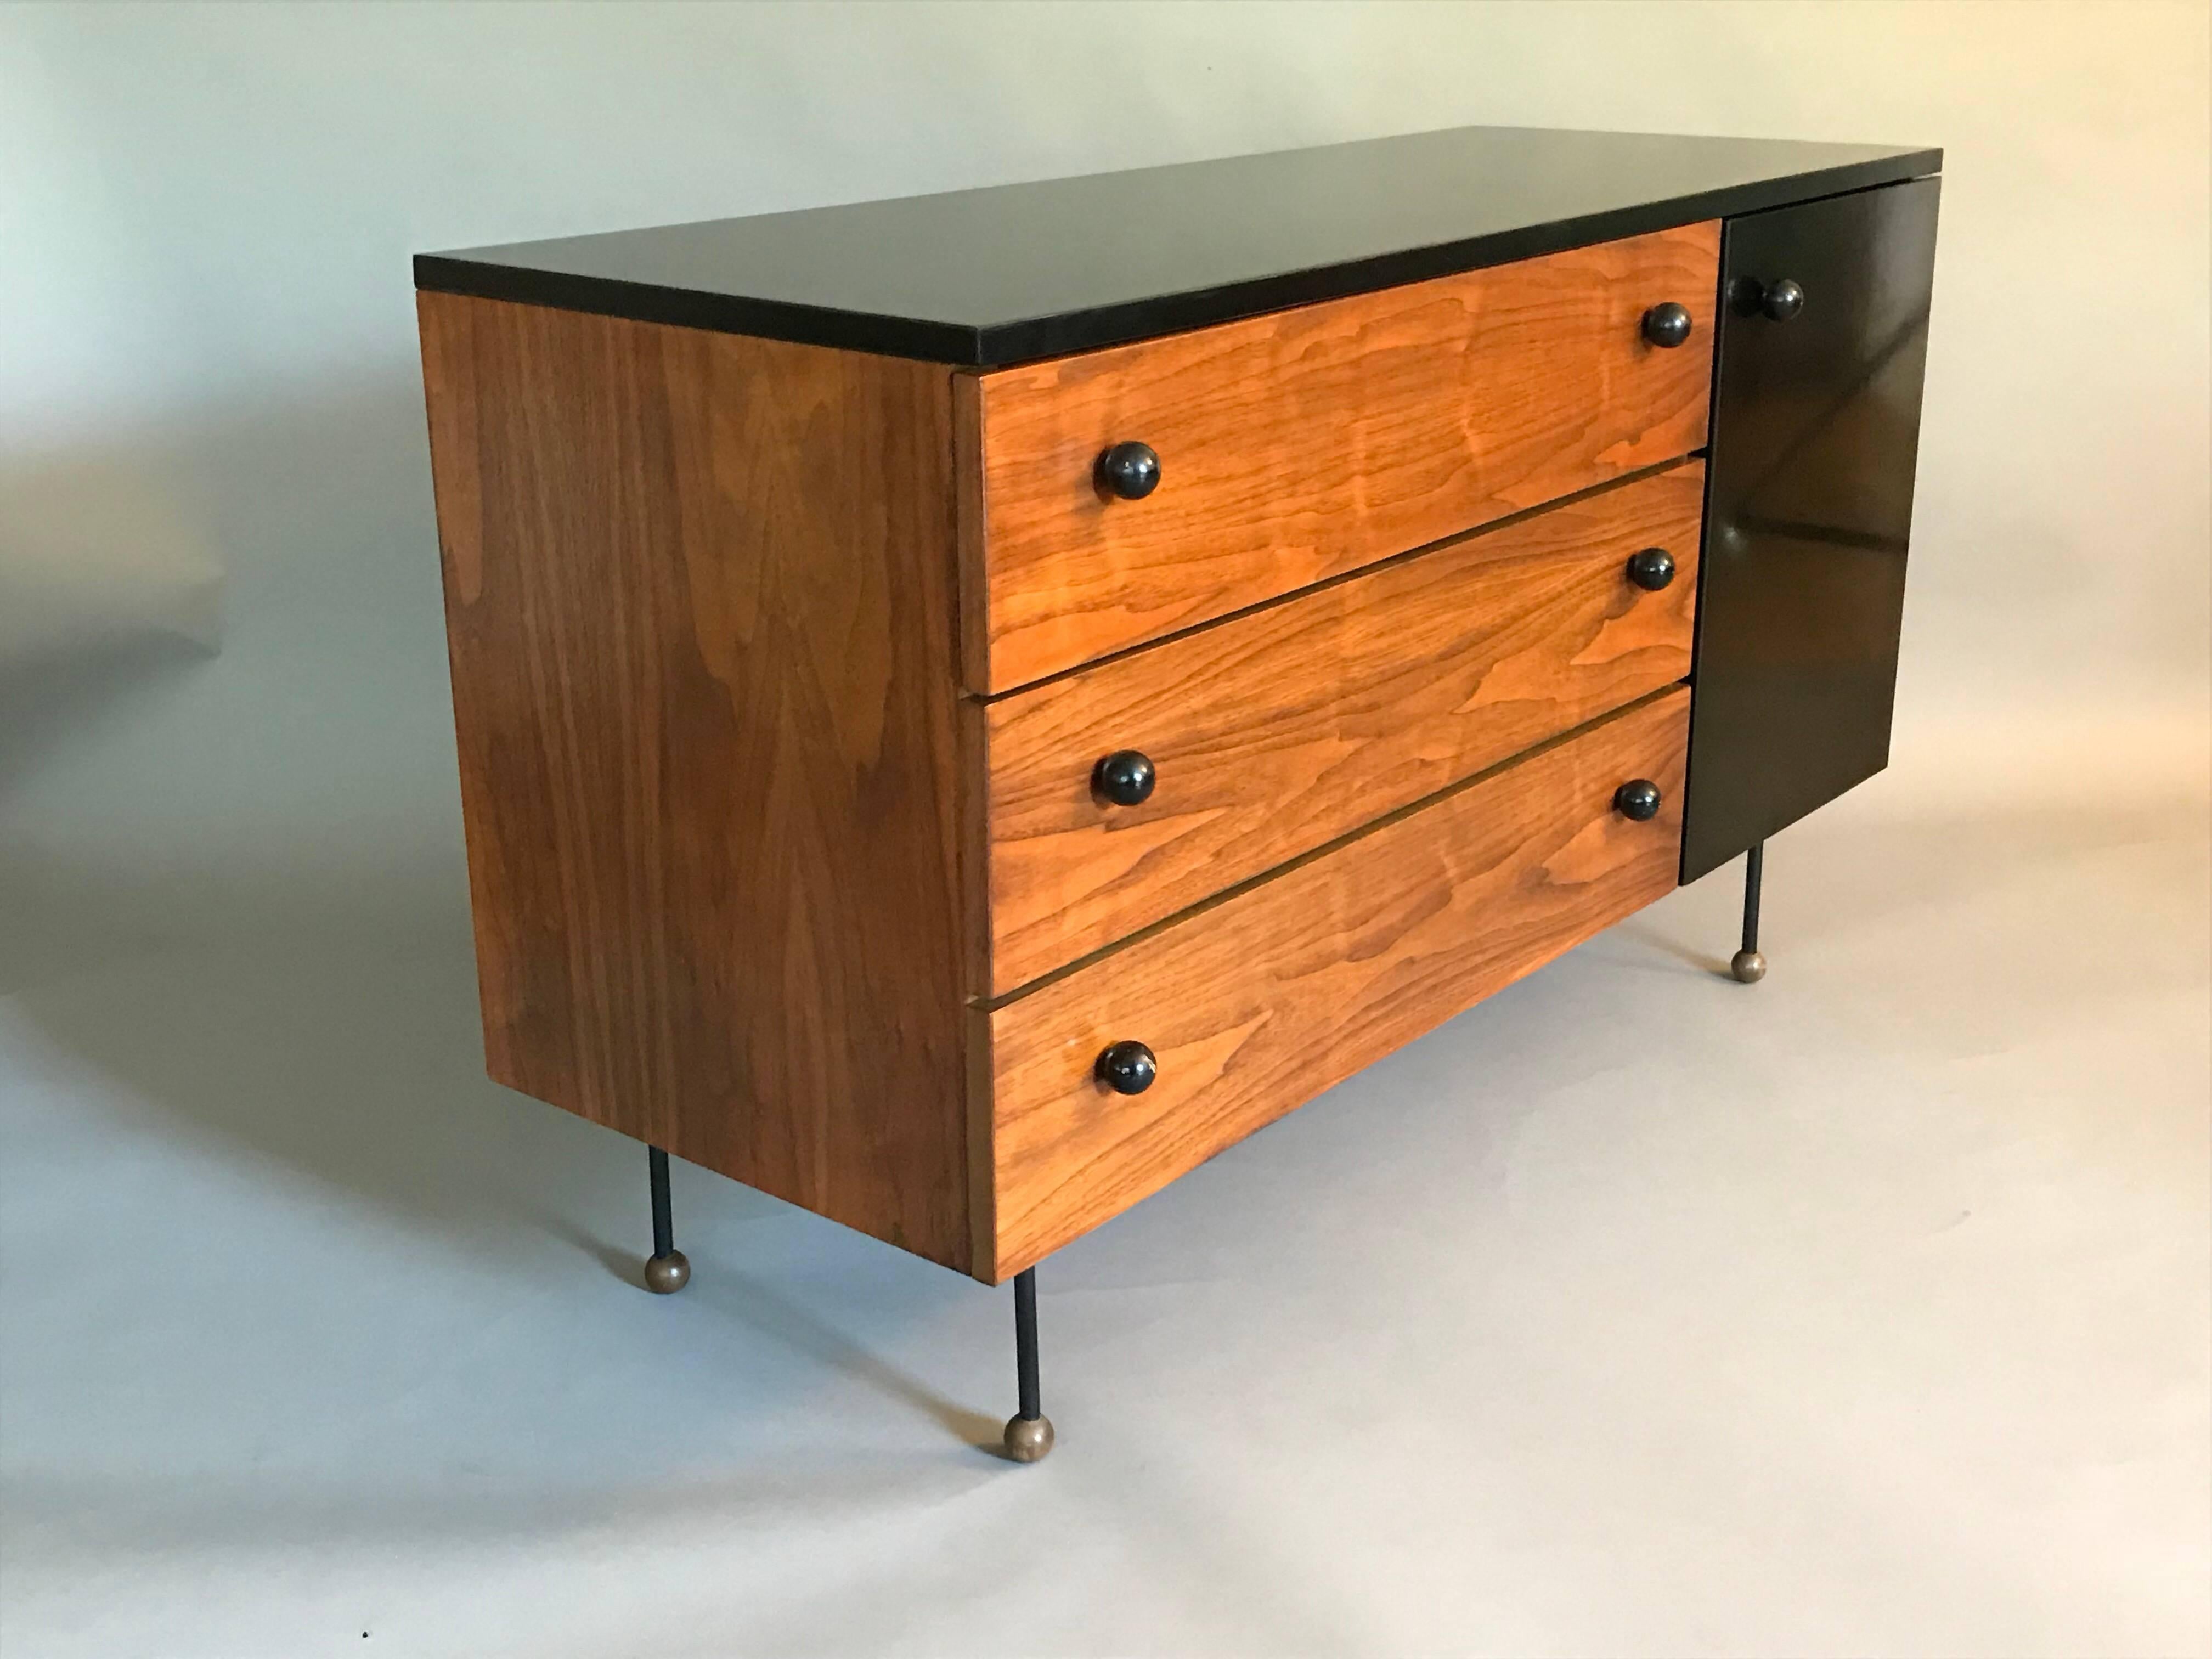 A rare and early California Modern design.
Made of plywood with walnut veneer, laminate top and door with iron and wood ball feet, original screws and knobs. 
The wood has been lightly refinished without taking away from its' historical integrity.